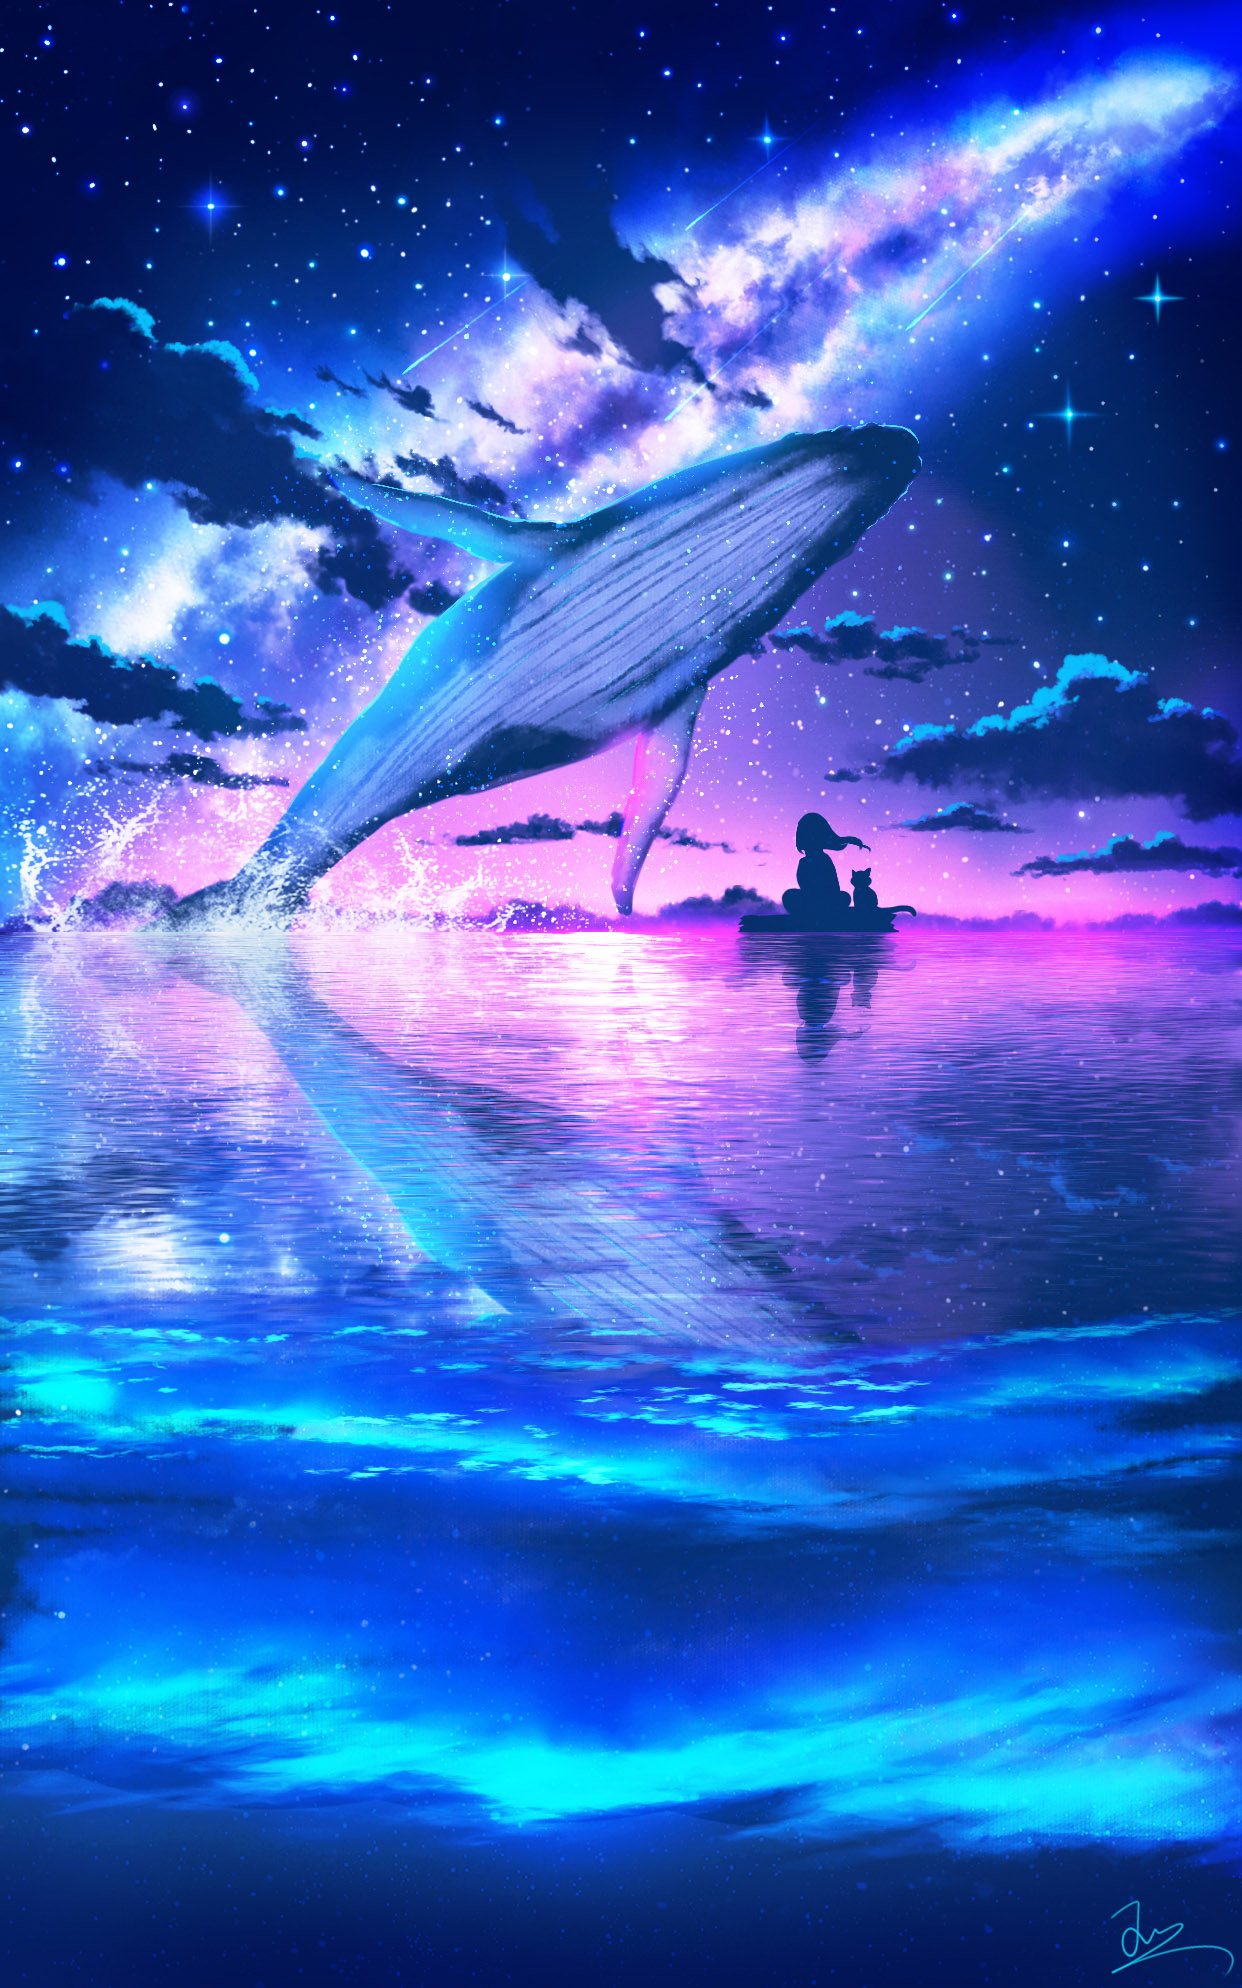 Anime 1242x1988 anime anime girls HuashiJW silhouette whale water stars signature portrait display sky clouds animals reflection sitting cats